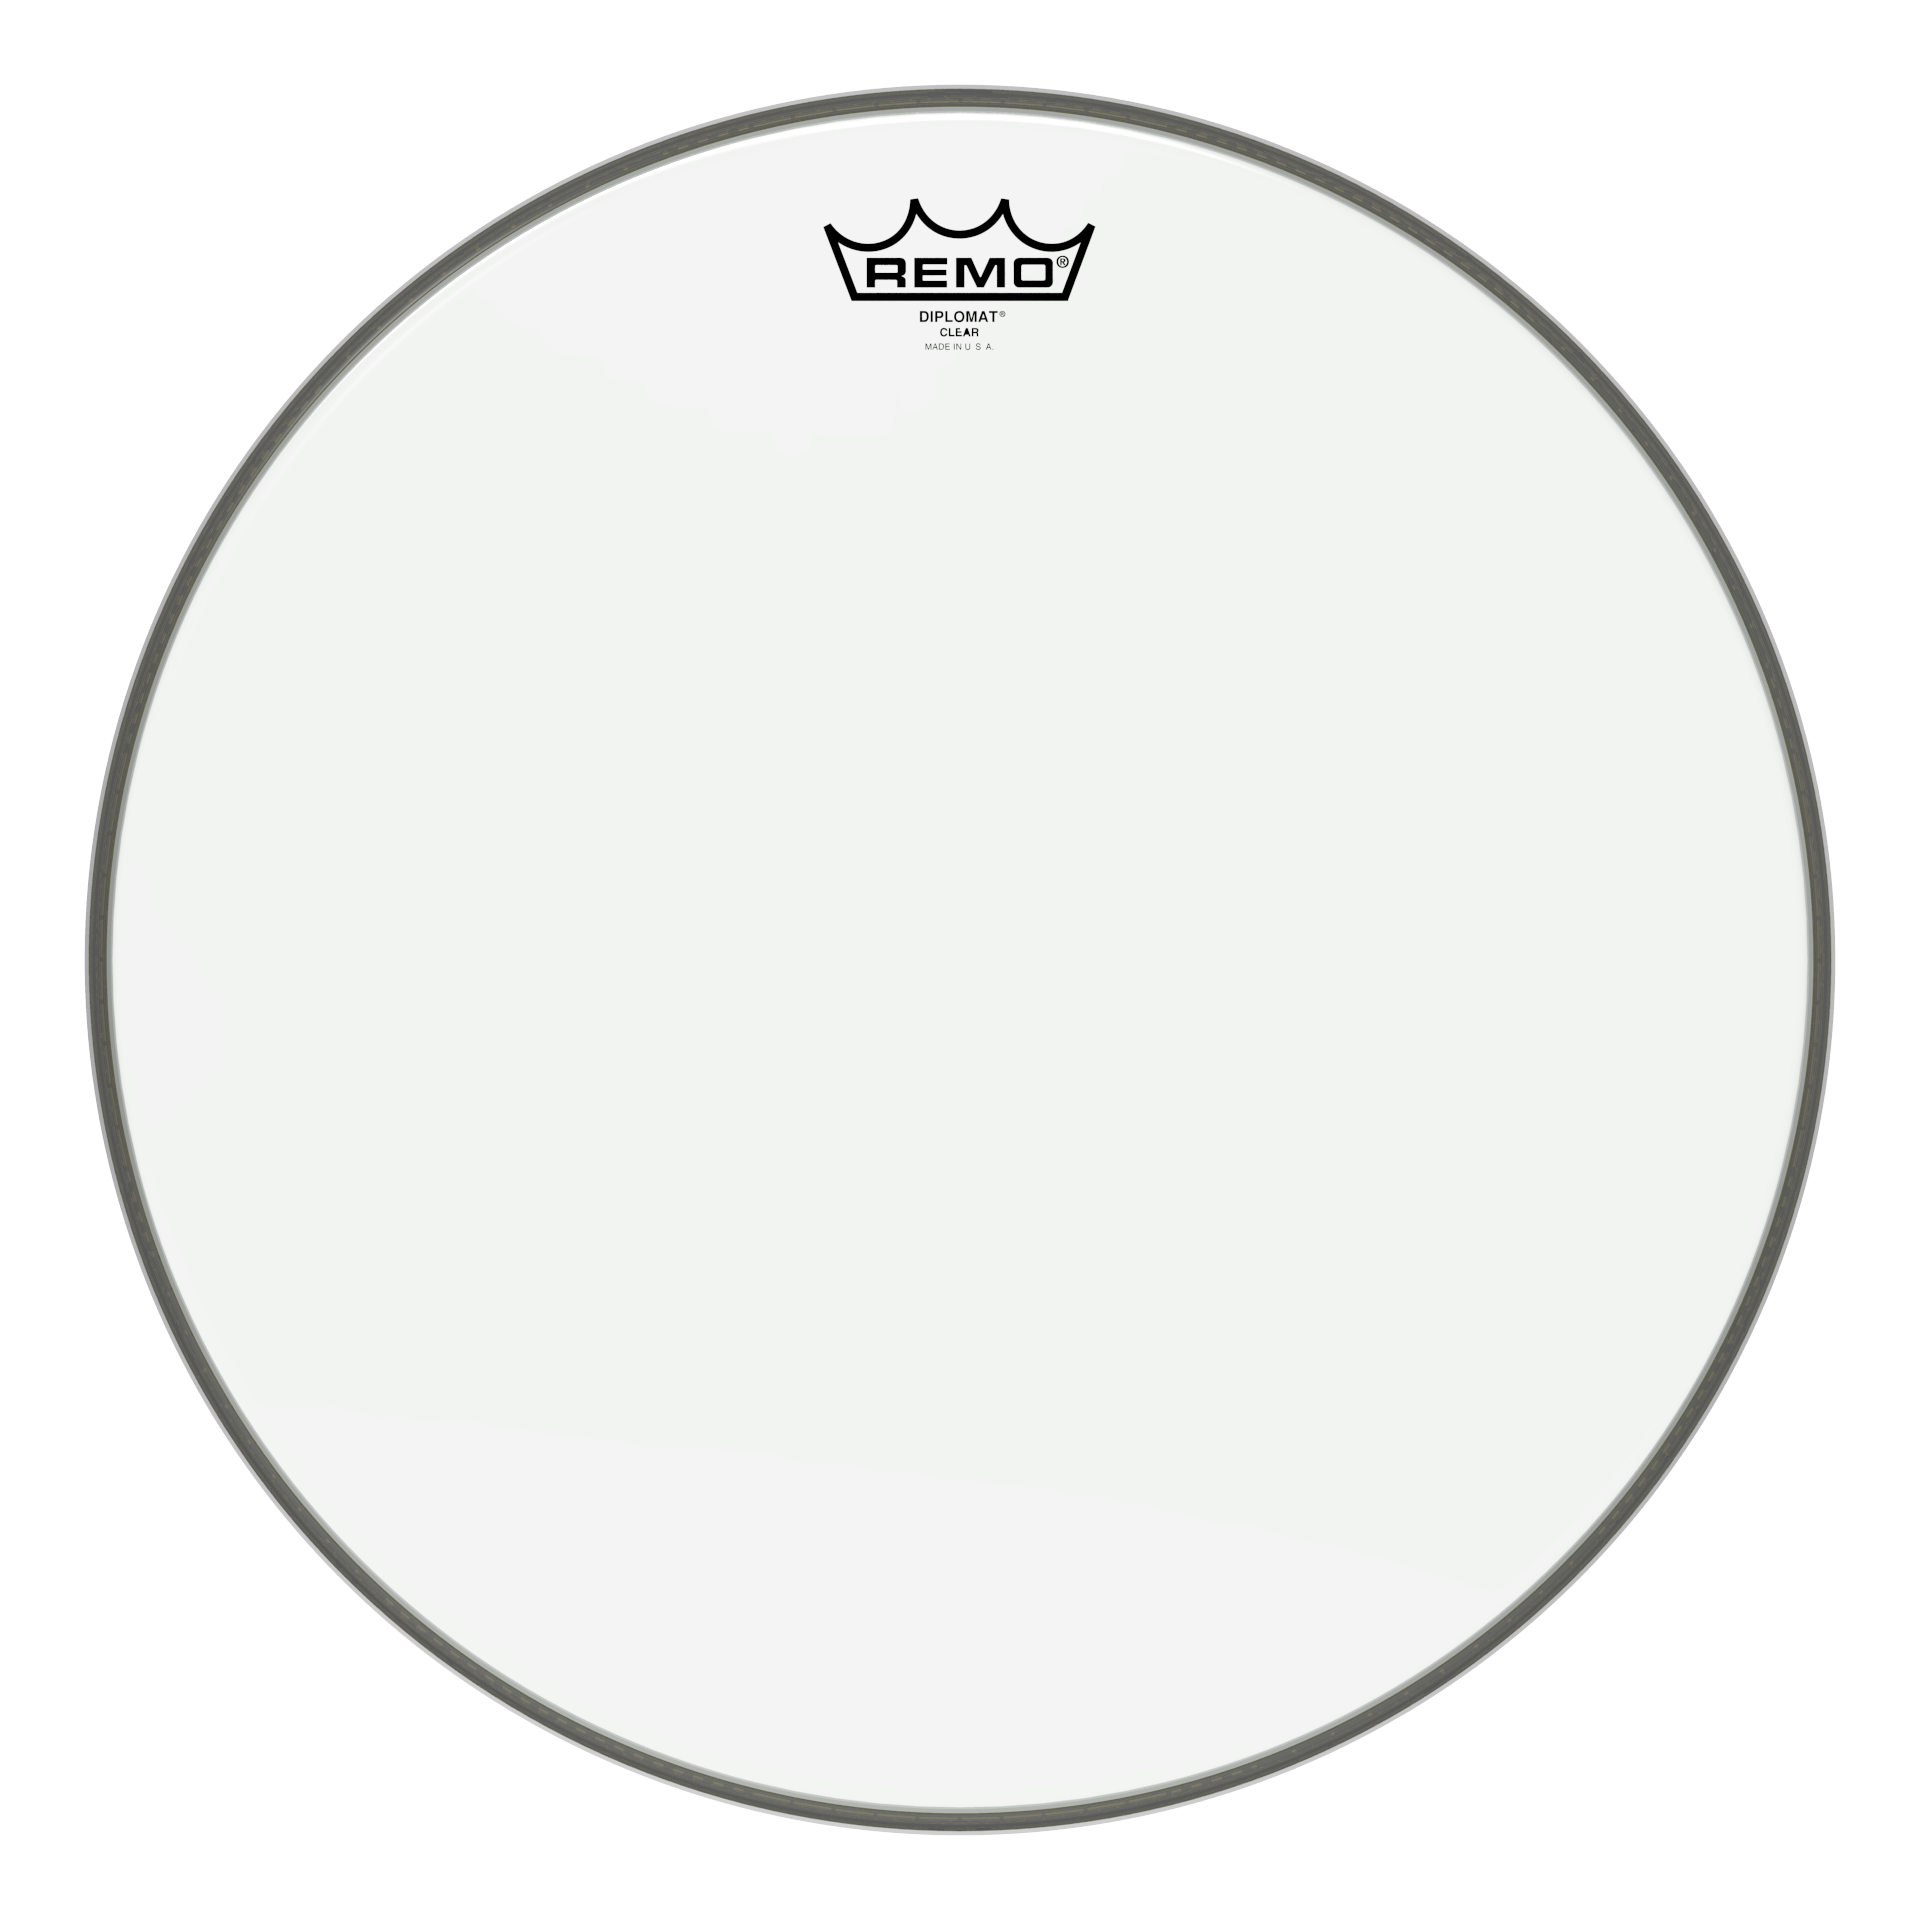 Remo BD-0316-00, Batter, Diplomat, Clear, Drum Head, 16 inch